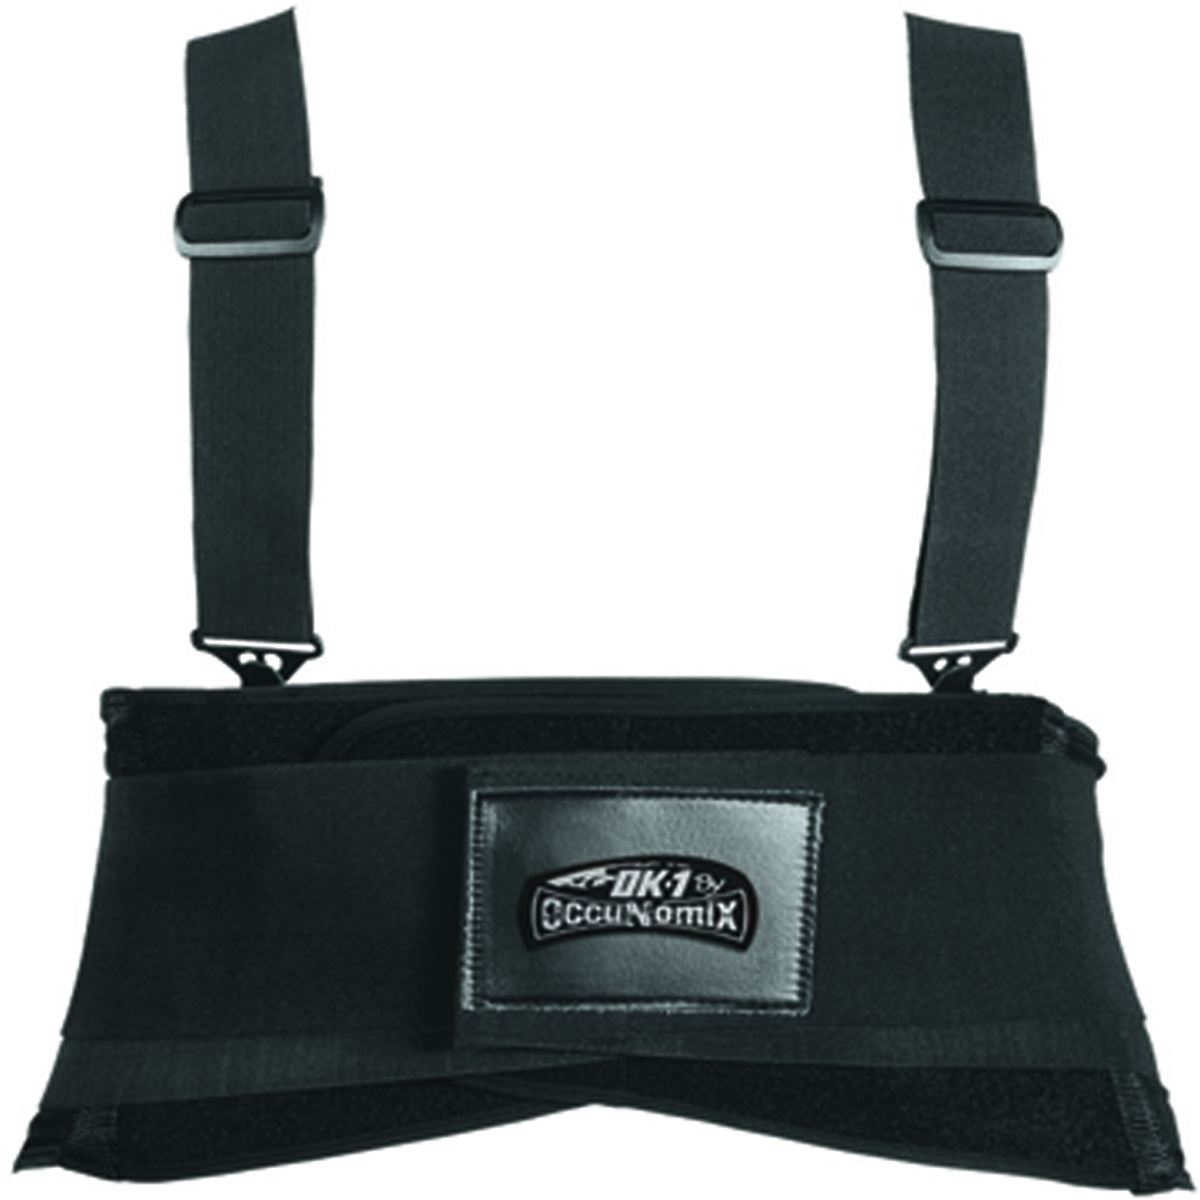 OccuNomix Large Black OK-1 Polyester/Rubber Back Support